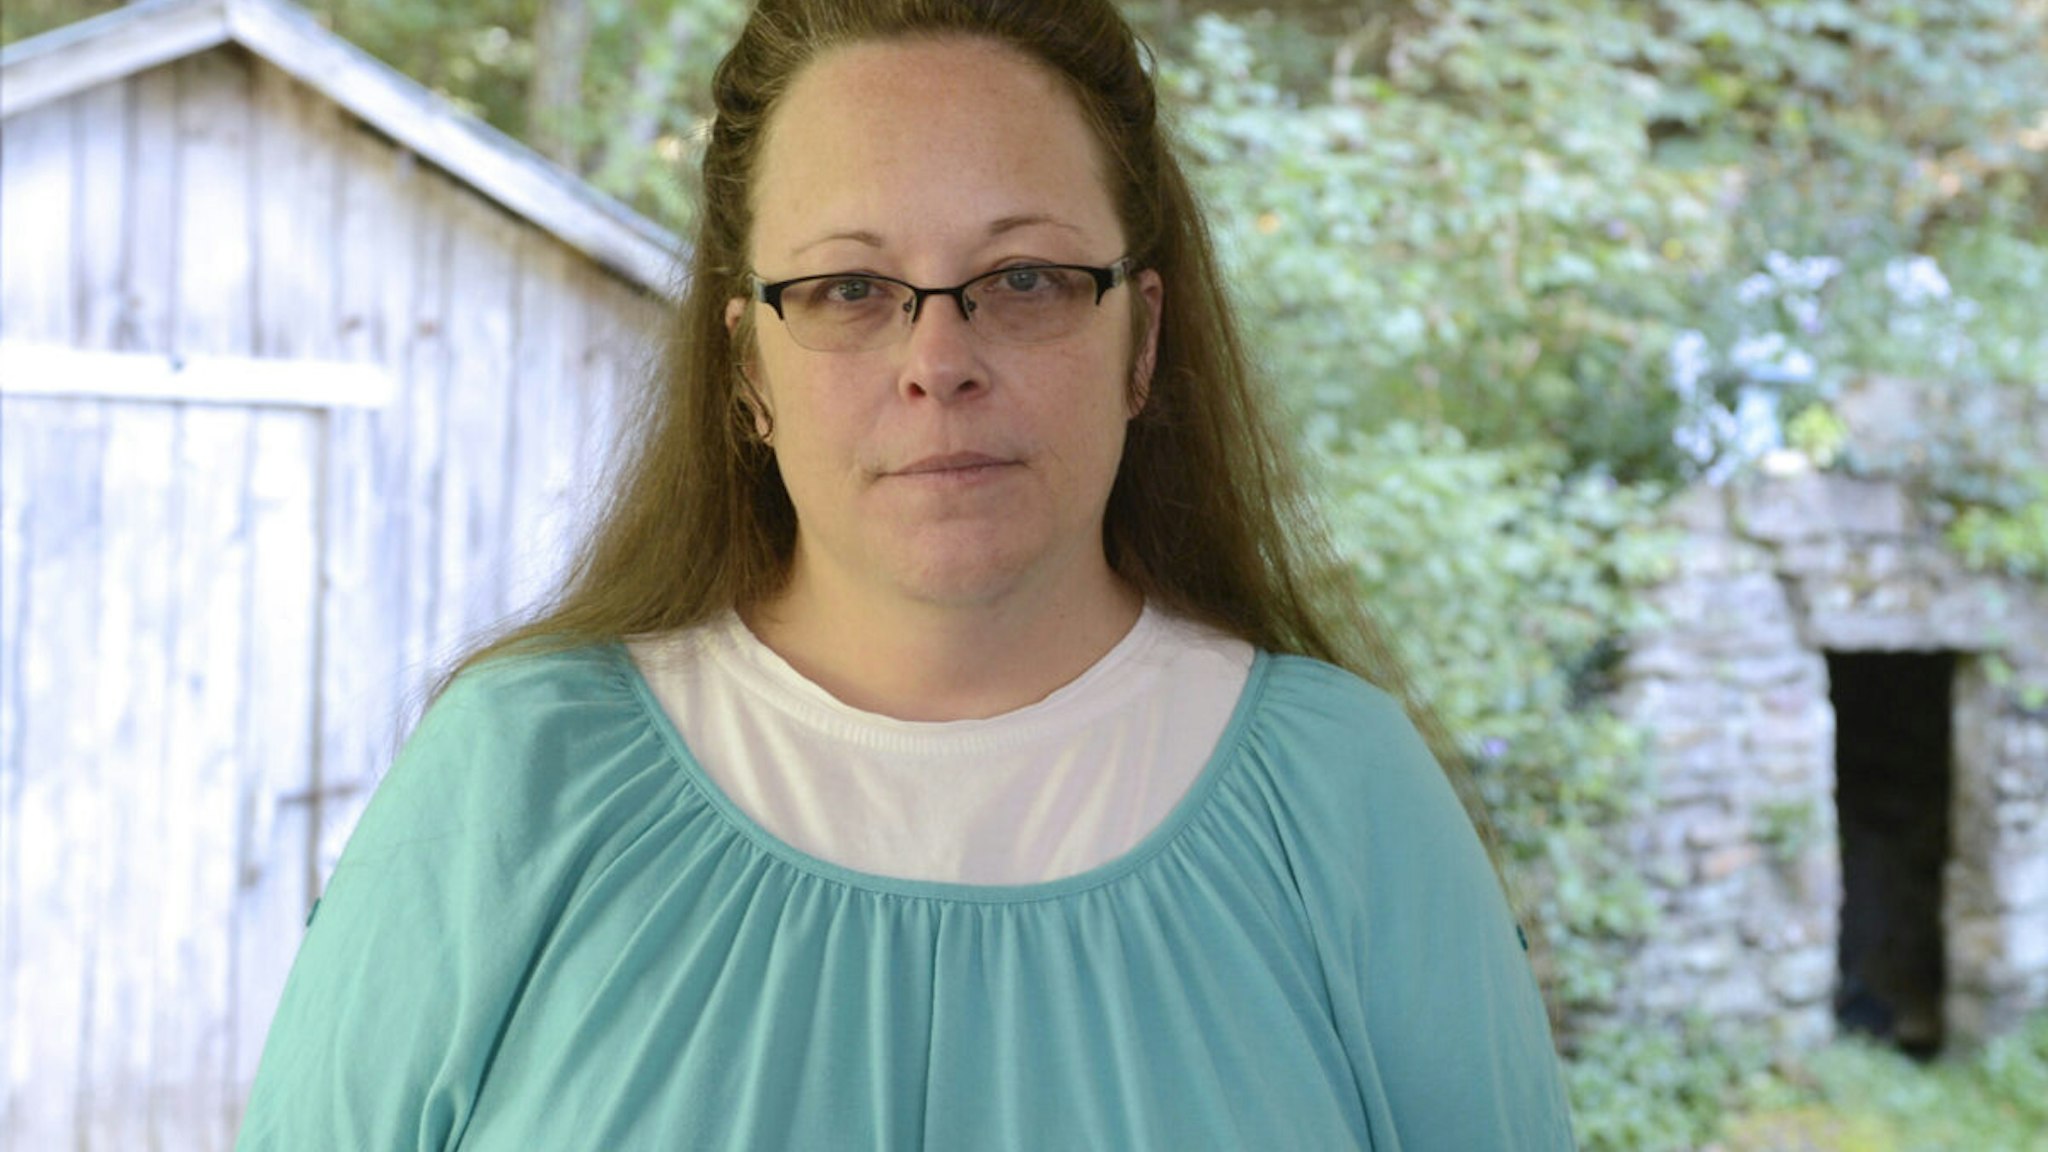 Walt Disney Television via Getty Images NEWS - 9/21/15 - Paula Faris speaks to Kim Davis, the Kentucky court clerk who went to jail because she refused to issue gay marriage licenses. The exclusive interview will air on all Walt Disney Television via Getty Images News programs and platforms.